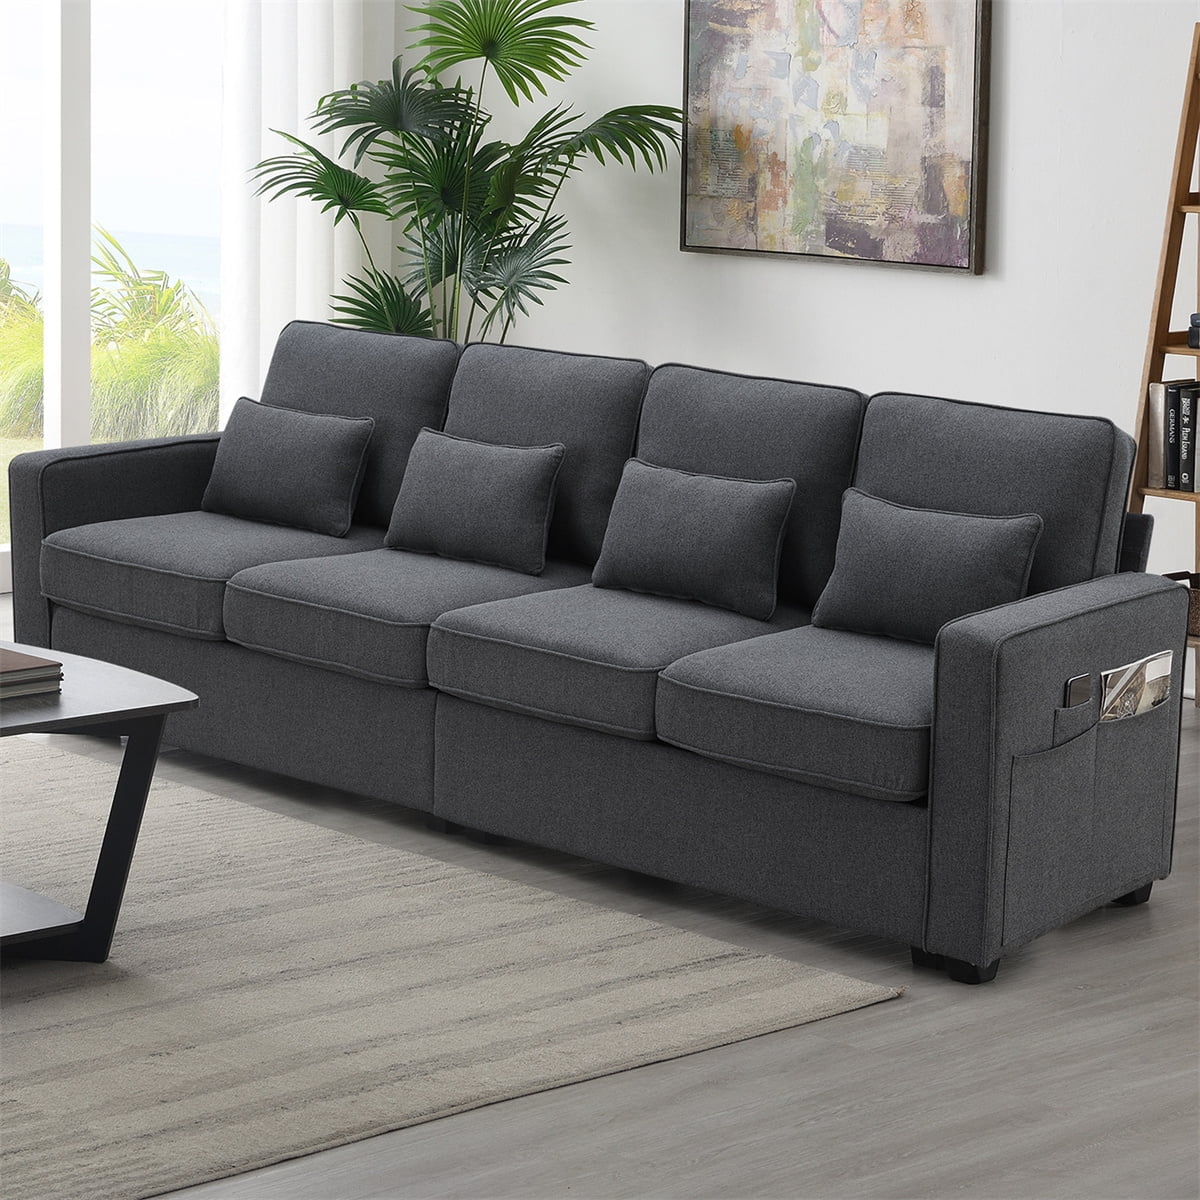 104L Upholstered Sofa,Modern 4-Seater Linen Fabric Sofa with